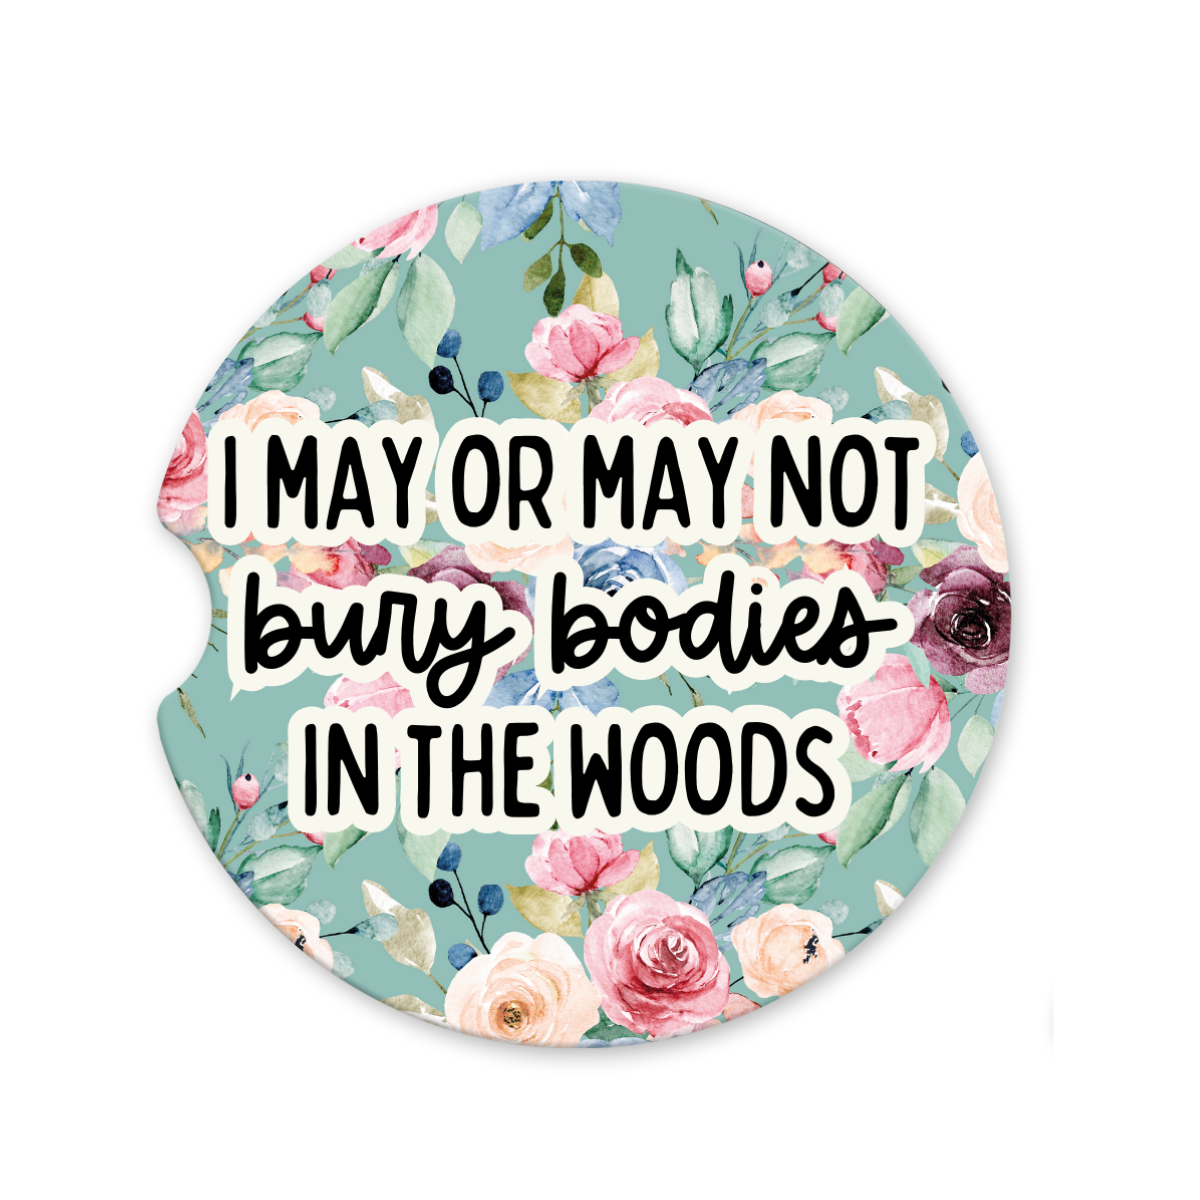 I May Or May Not Bury Bodies In The Woods | Car Coaster - The Pretty Things.ca